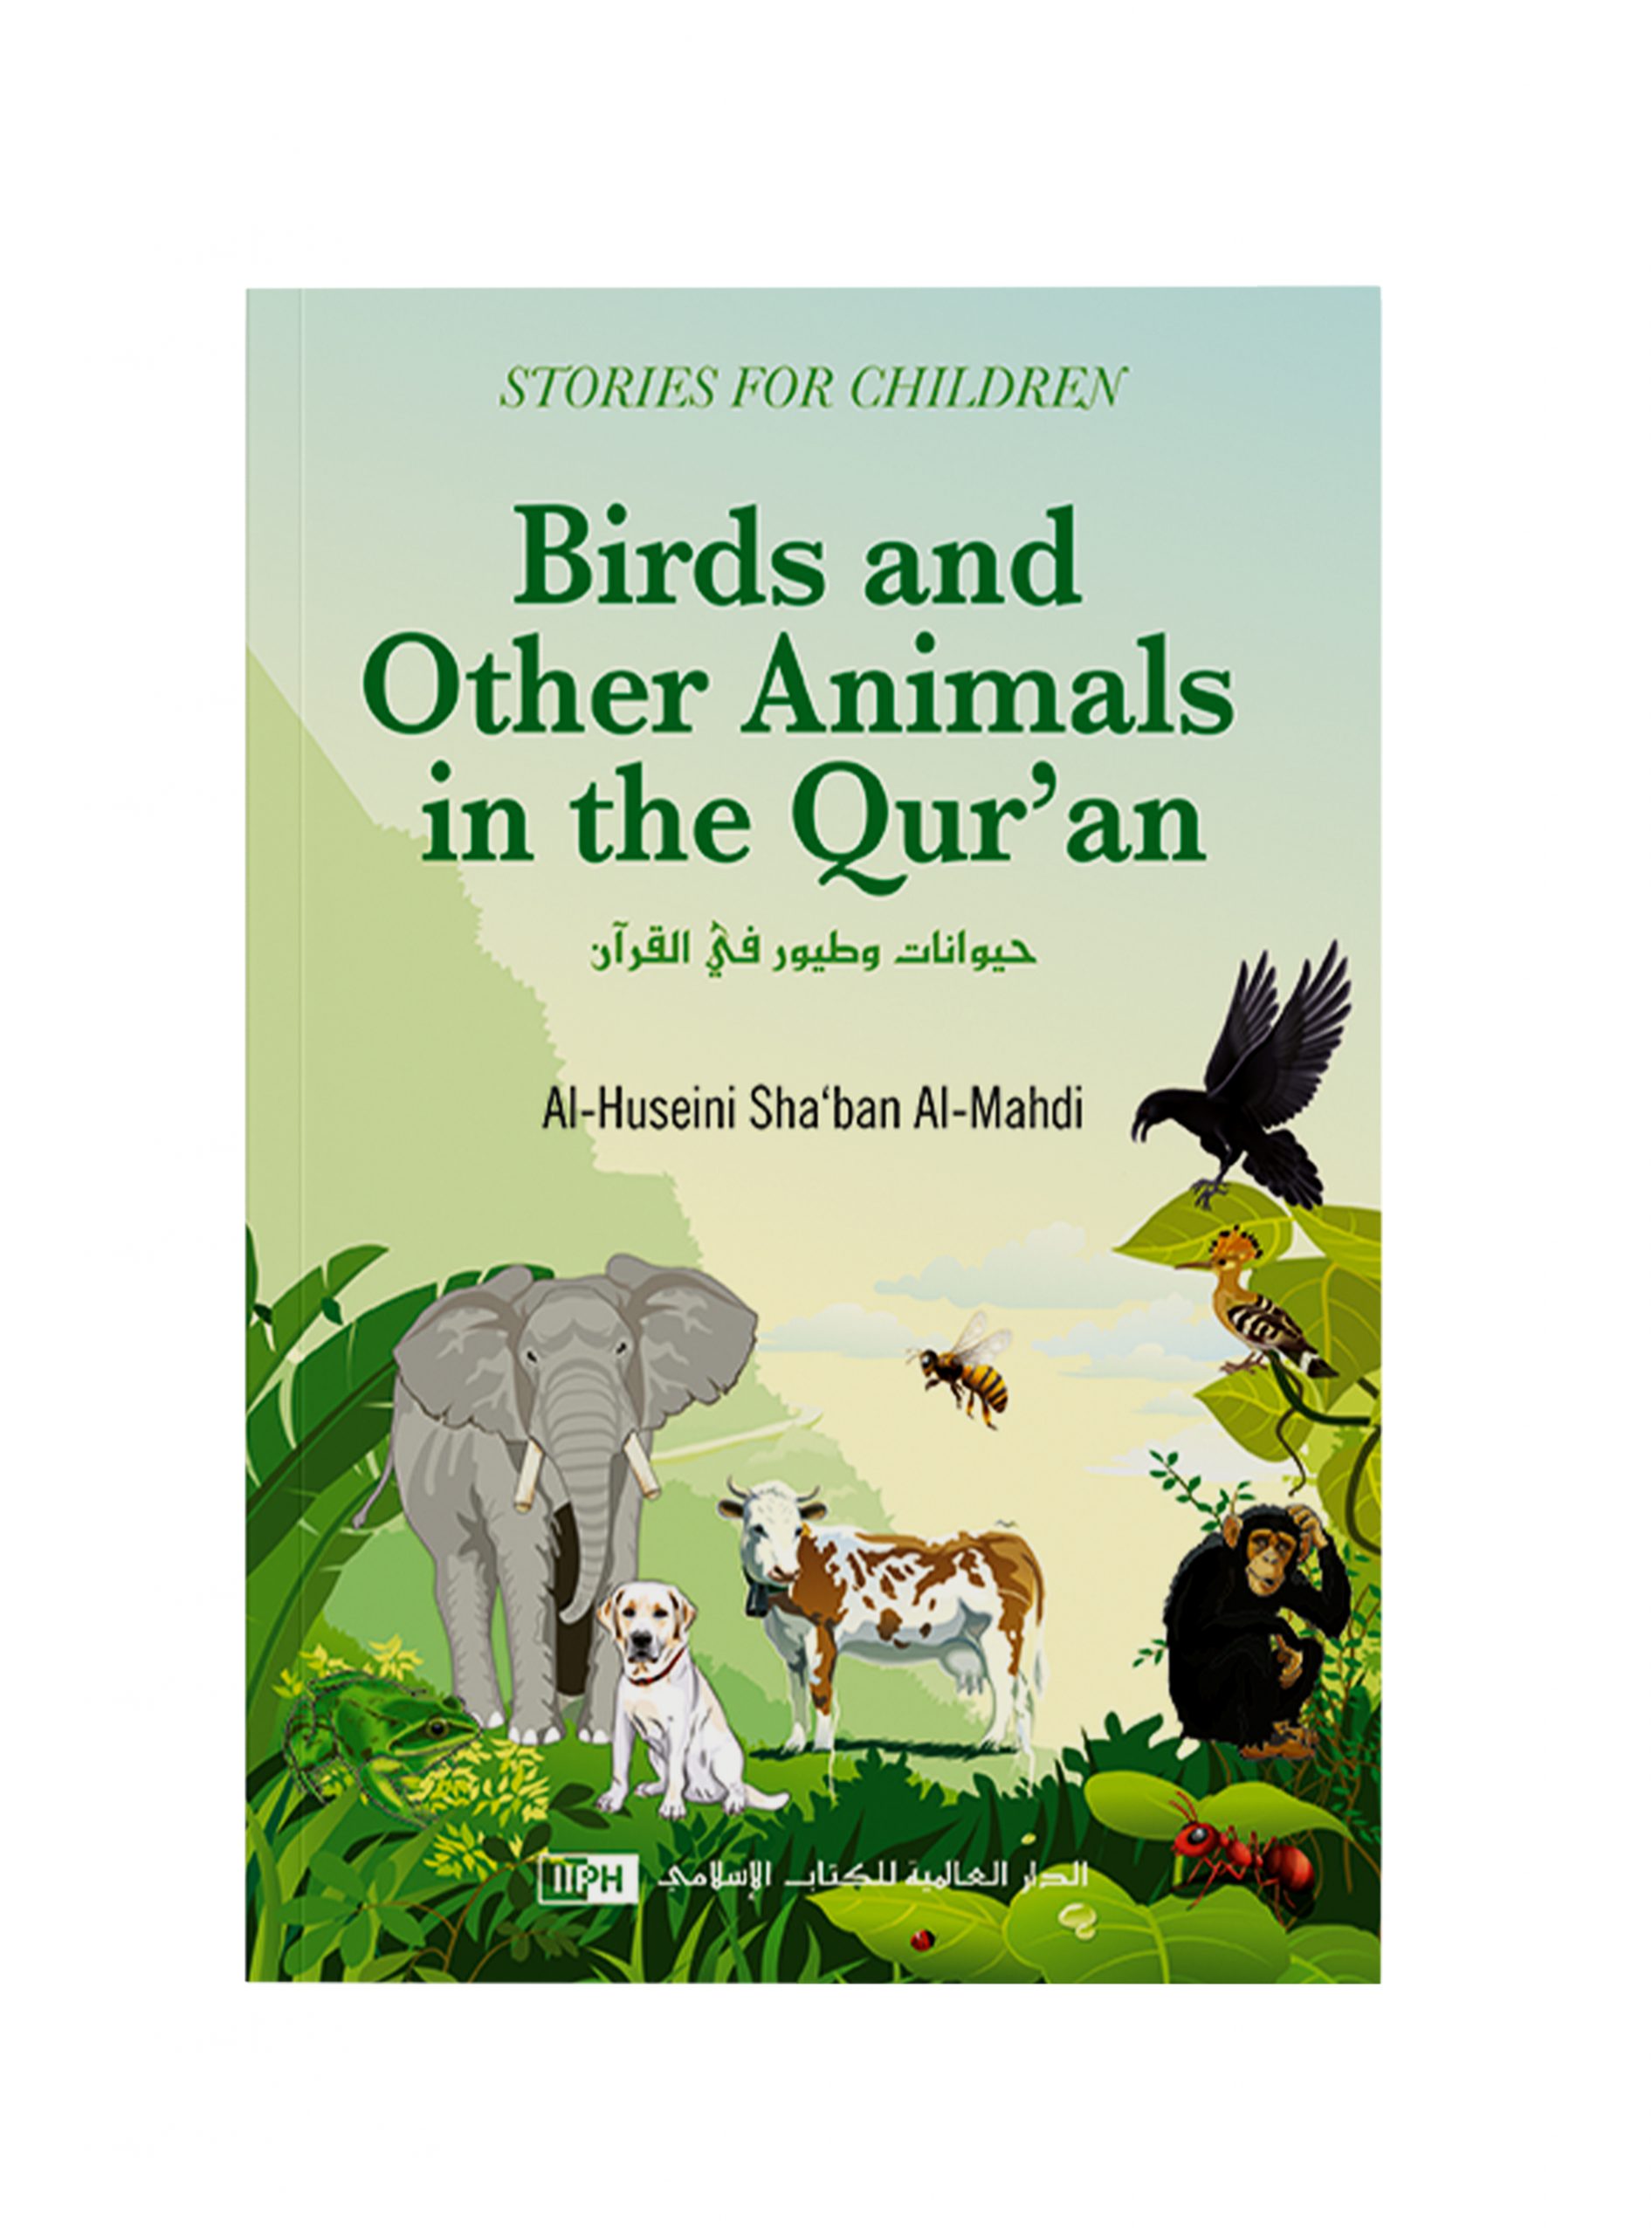 Birds and Other Animals in the Qur'an by Al-Huseini Sha'ban Al-Mahdi